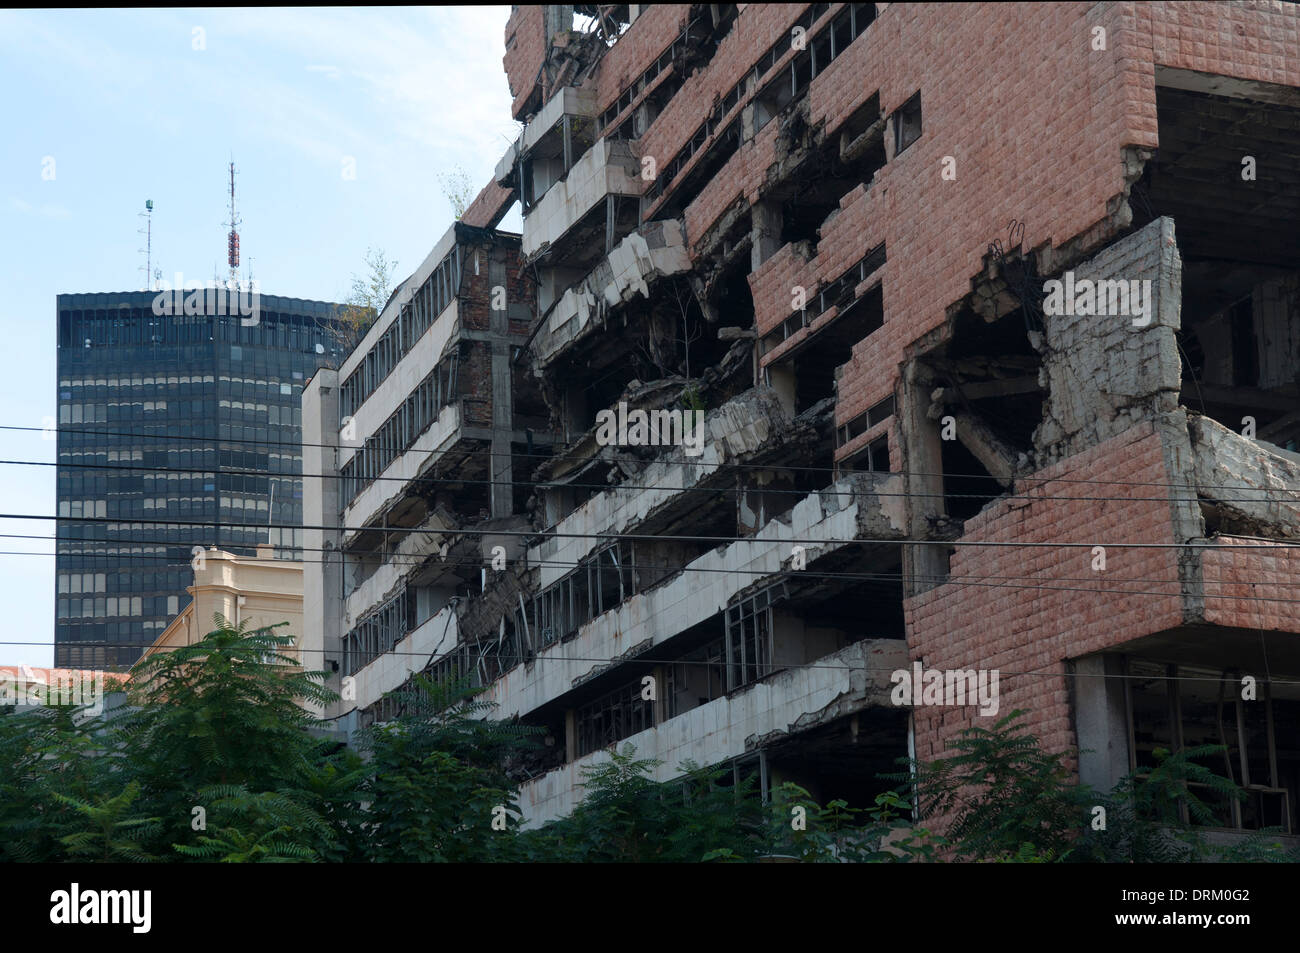 The remains of former Goverment Department for Defence destroyed by NATO bombing in 1999, Belgrade, Serbia Stock Photo